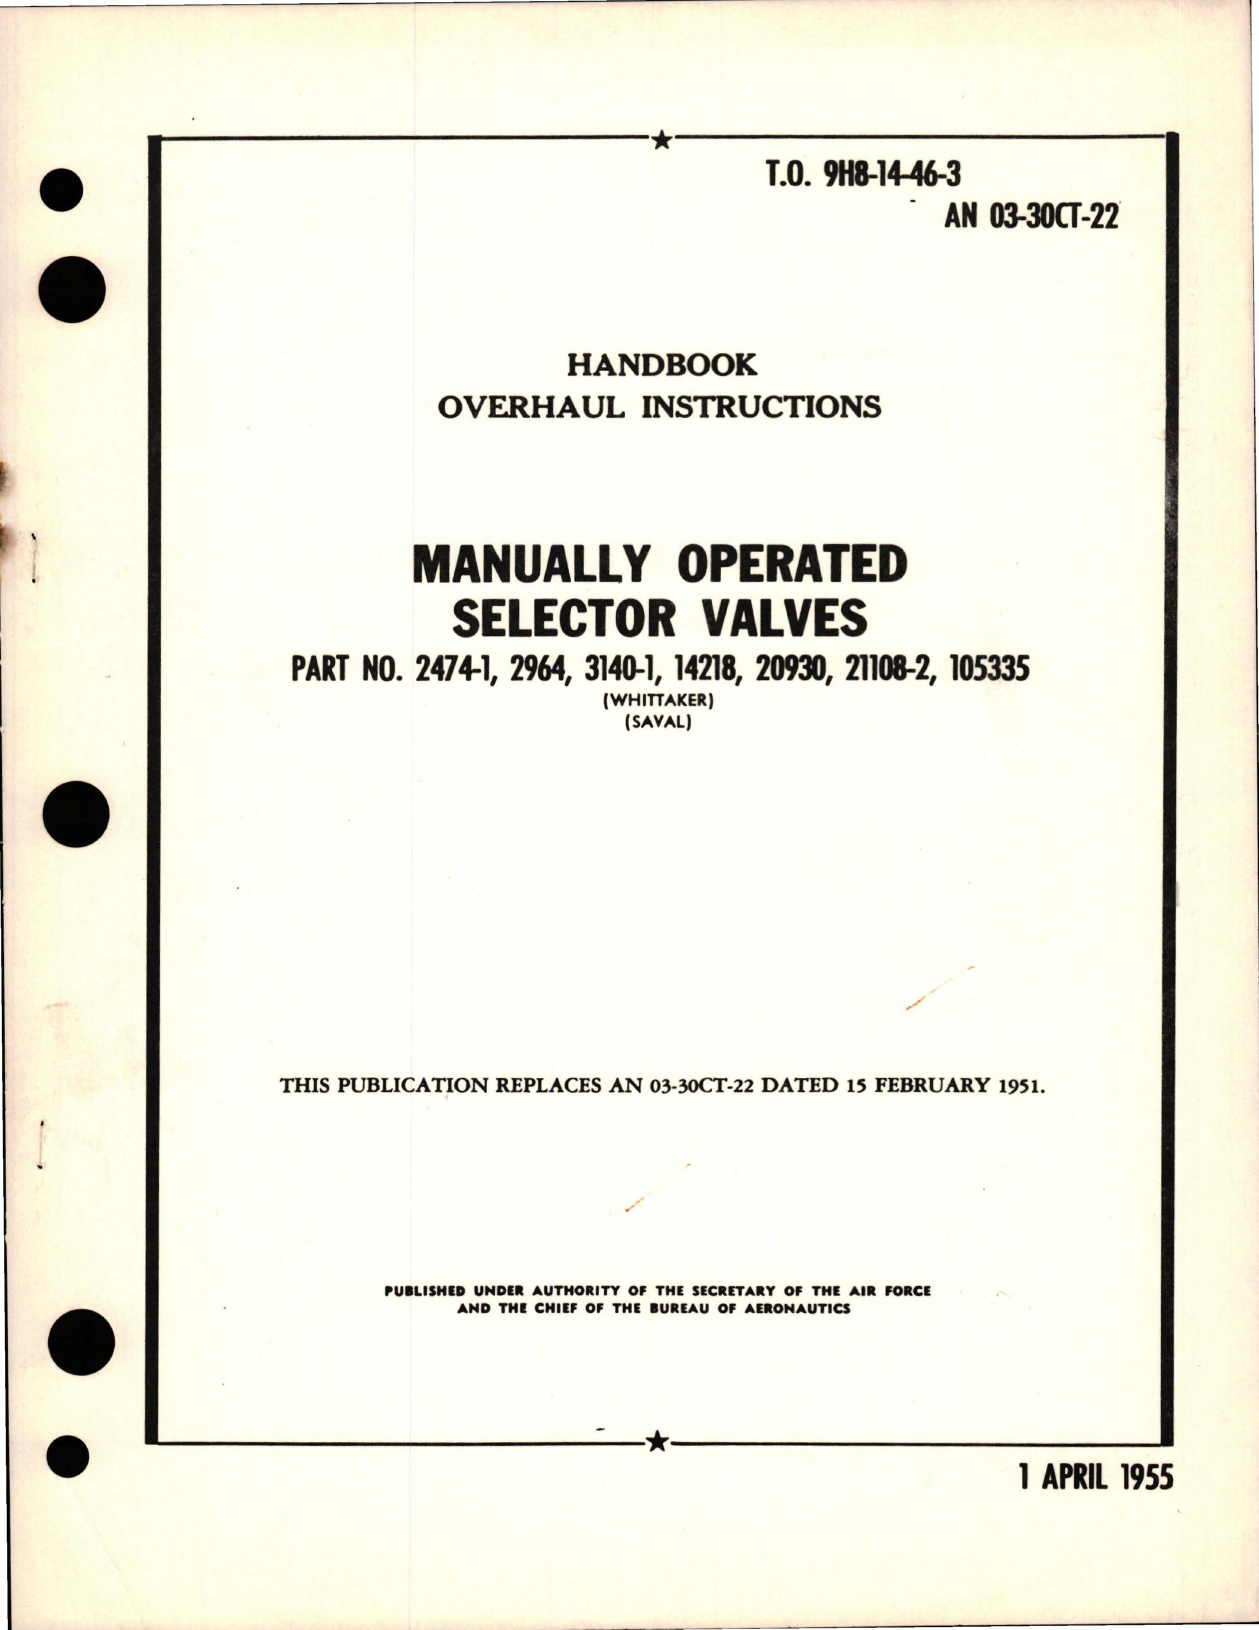 Sample page 1 from AirCorps Library document: Overhaul Instructions for Manually Operated Selector Valves